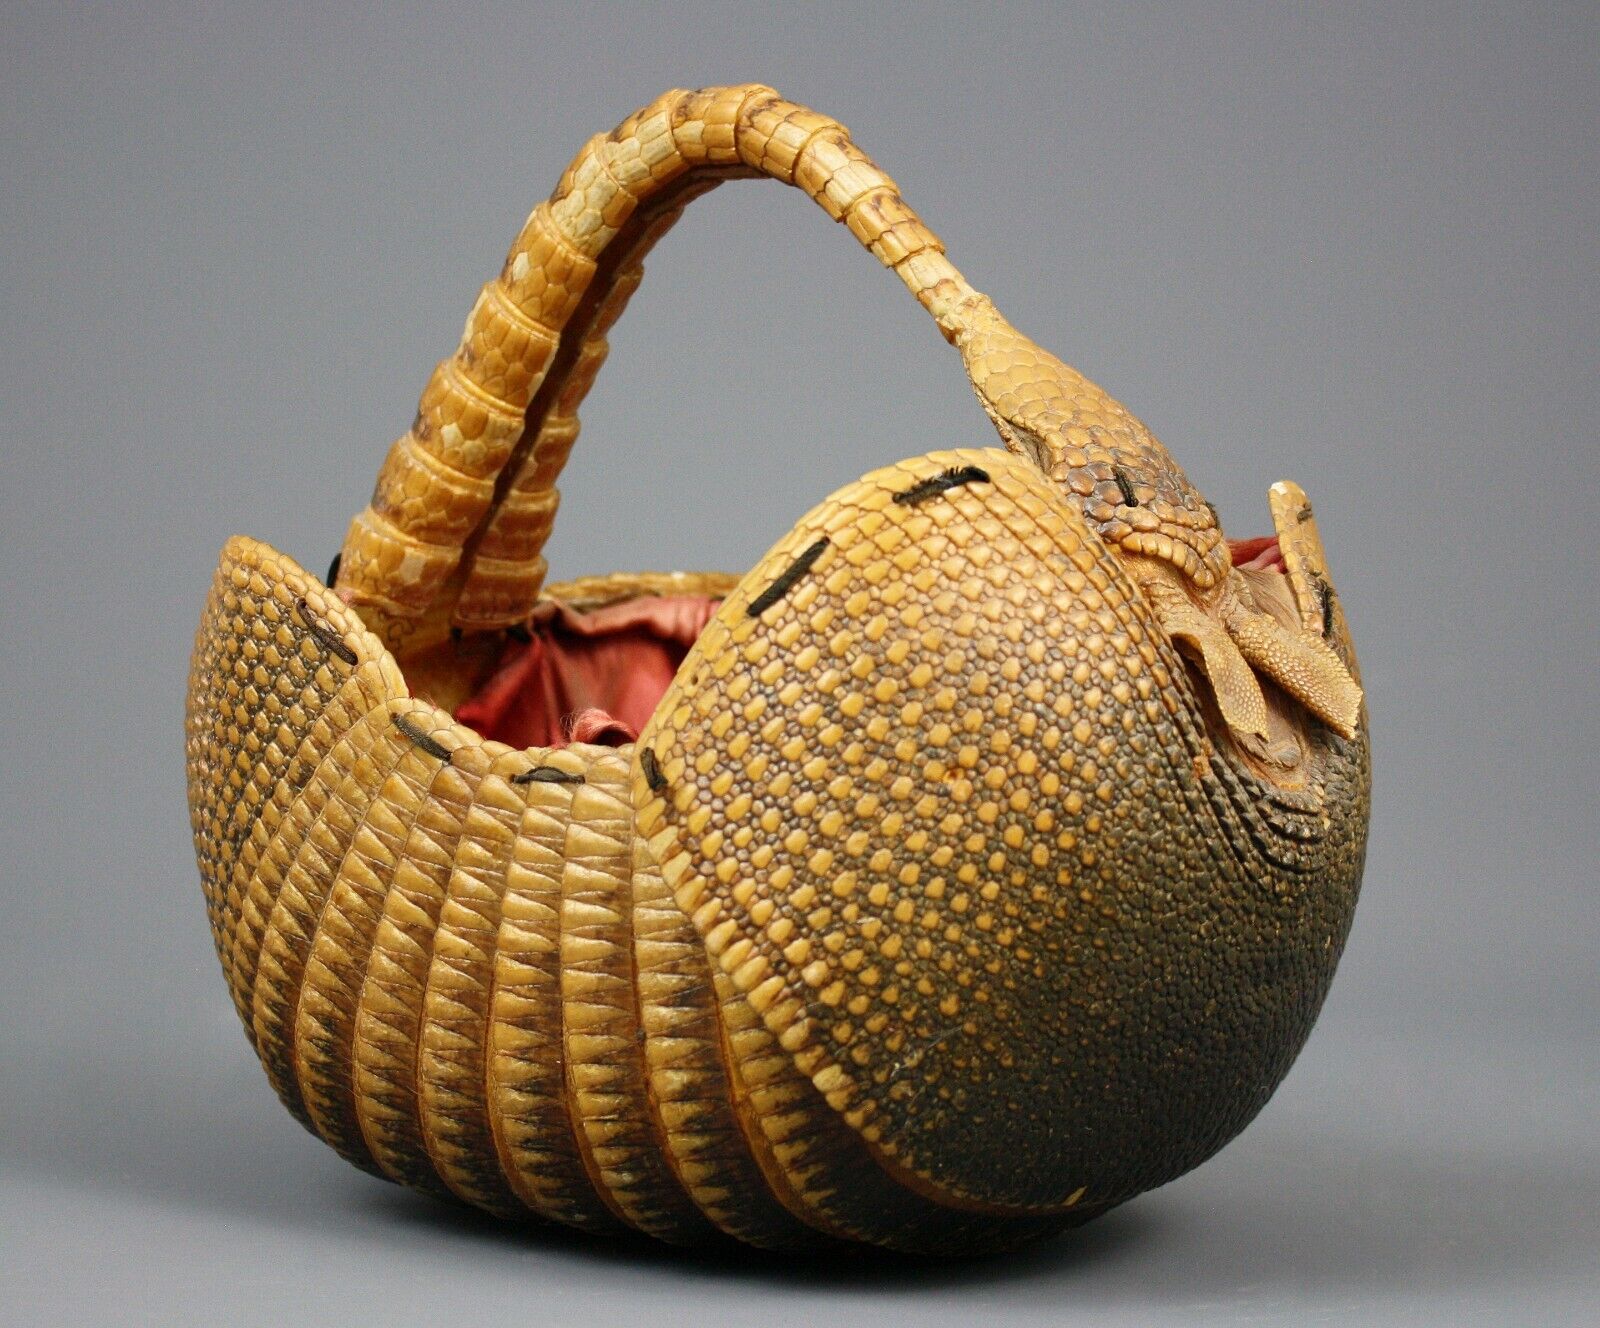 Vintage/Antique Taxidermy Armadillo Shell Basket, Lined w/ Satin